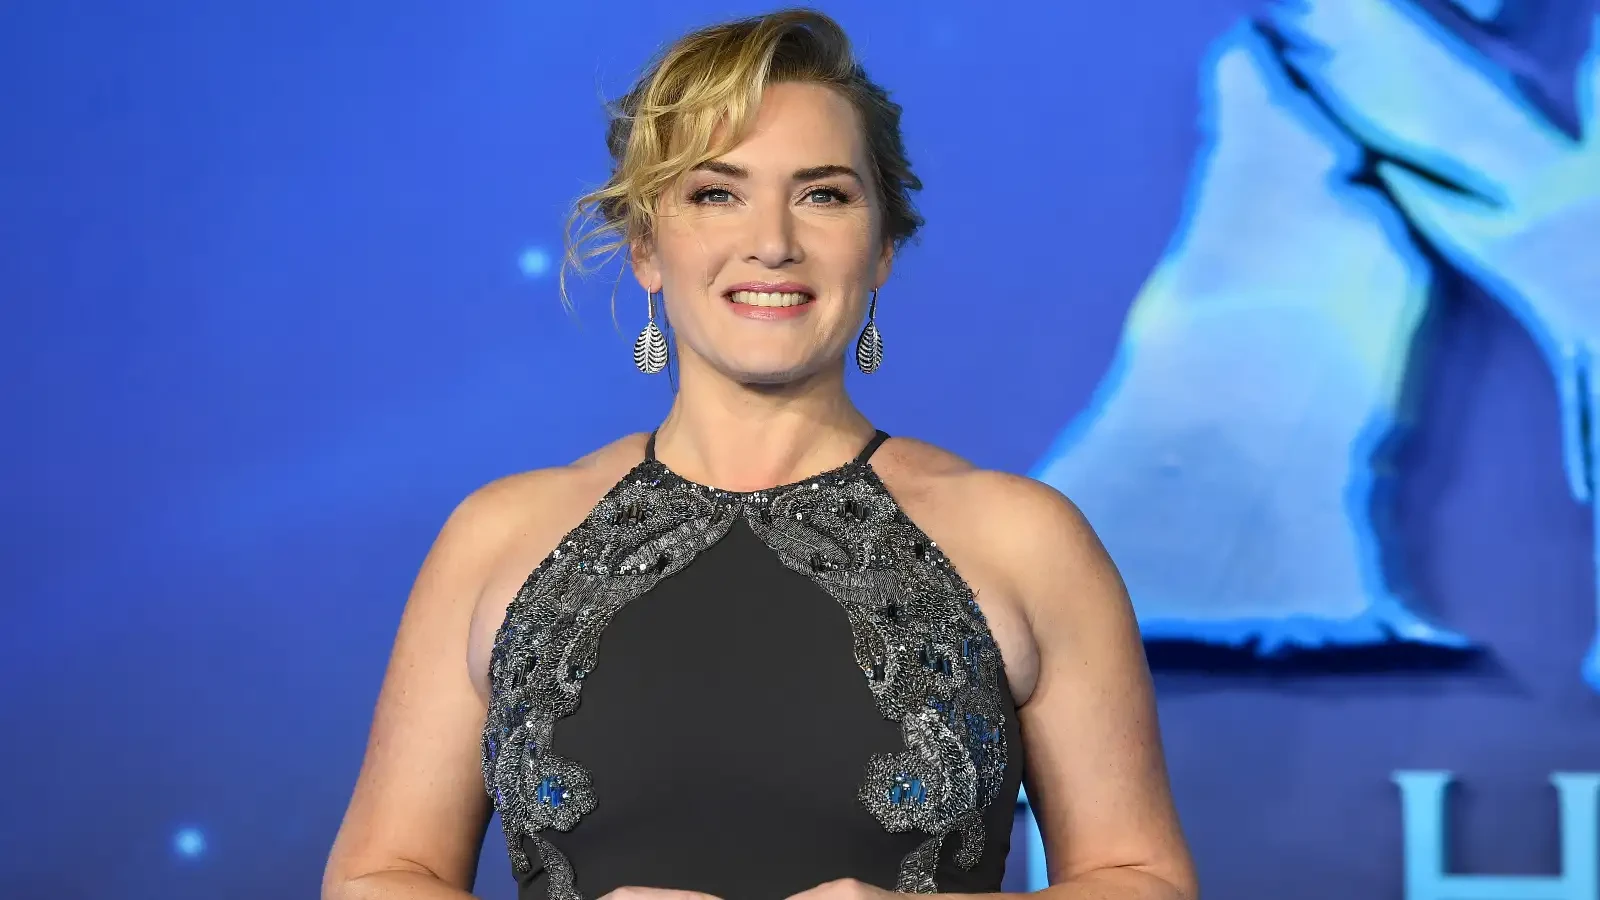 Kate Winslet became an overnight sensation with Titanic